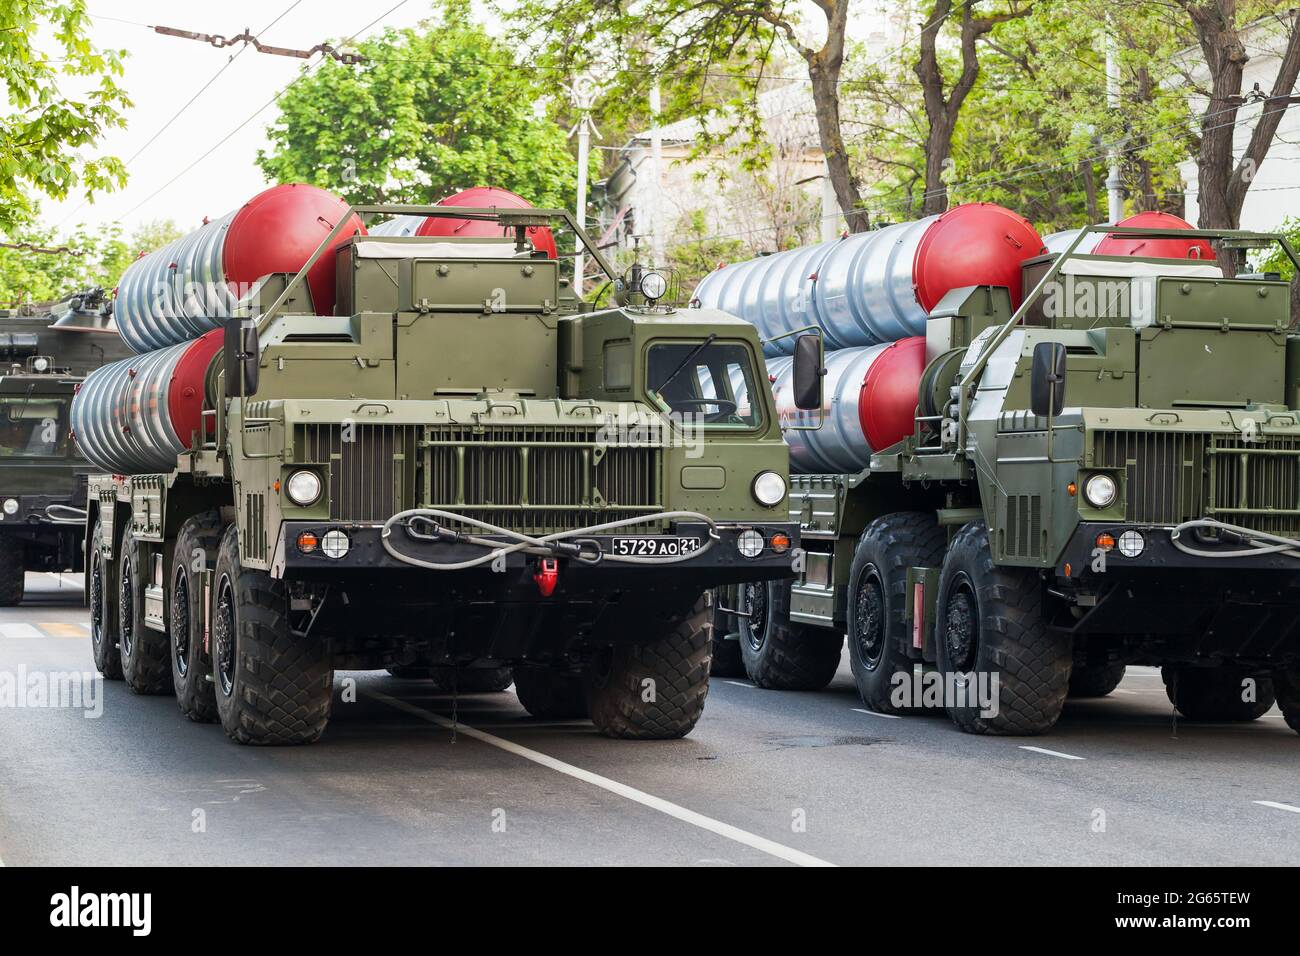 Sevastopol, Crimea - May 5, 2018: S-300 missile systems are on the military parade in honor of victory day Stock Photo